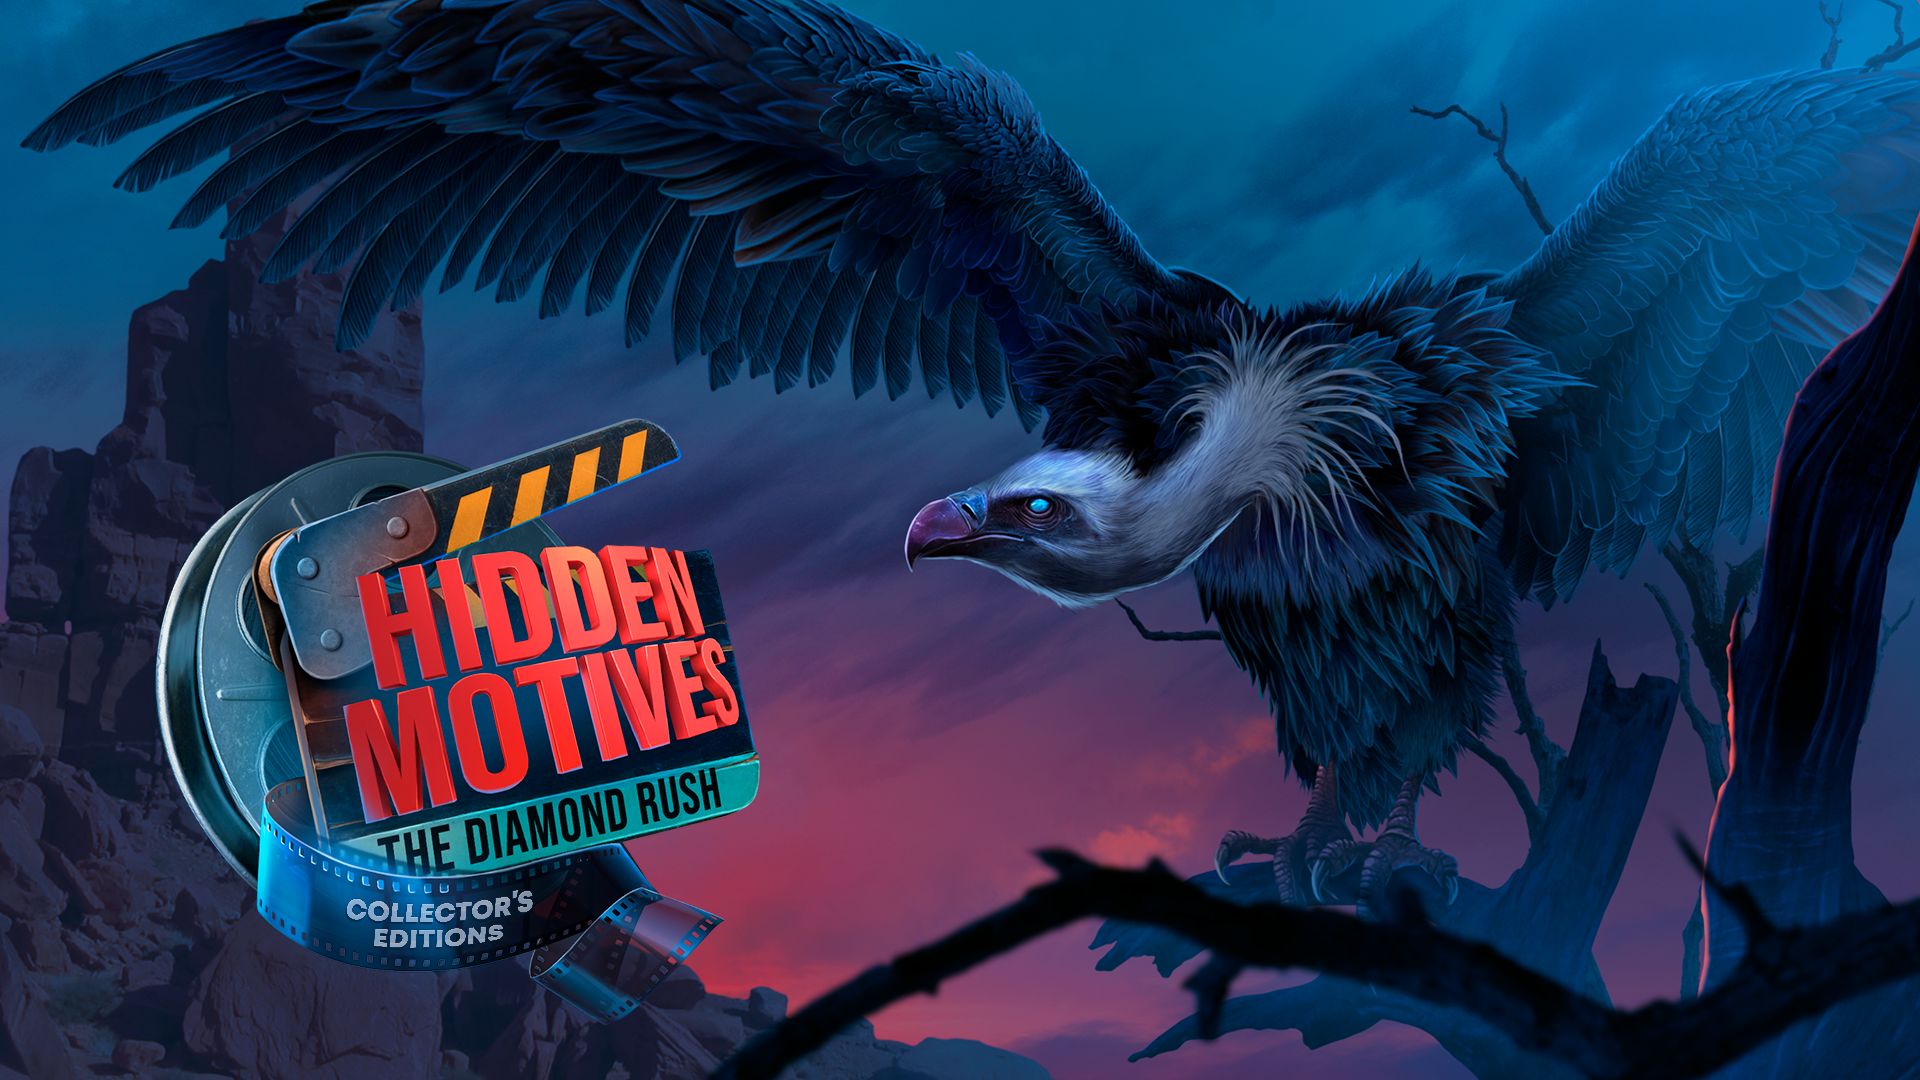 Download Hidden Motives: Diamond Rush Android free game.